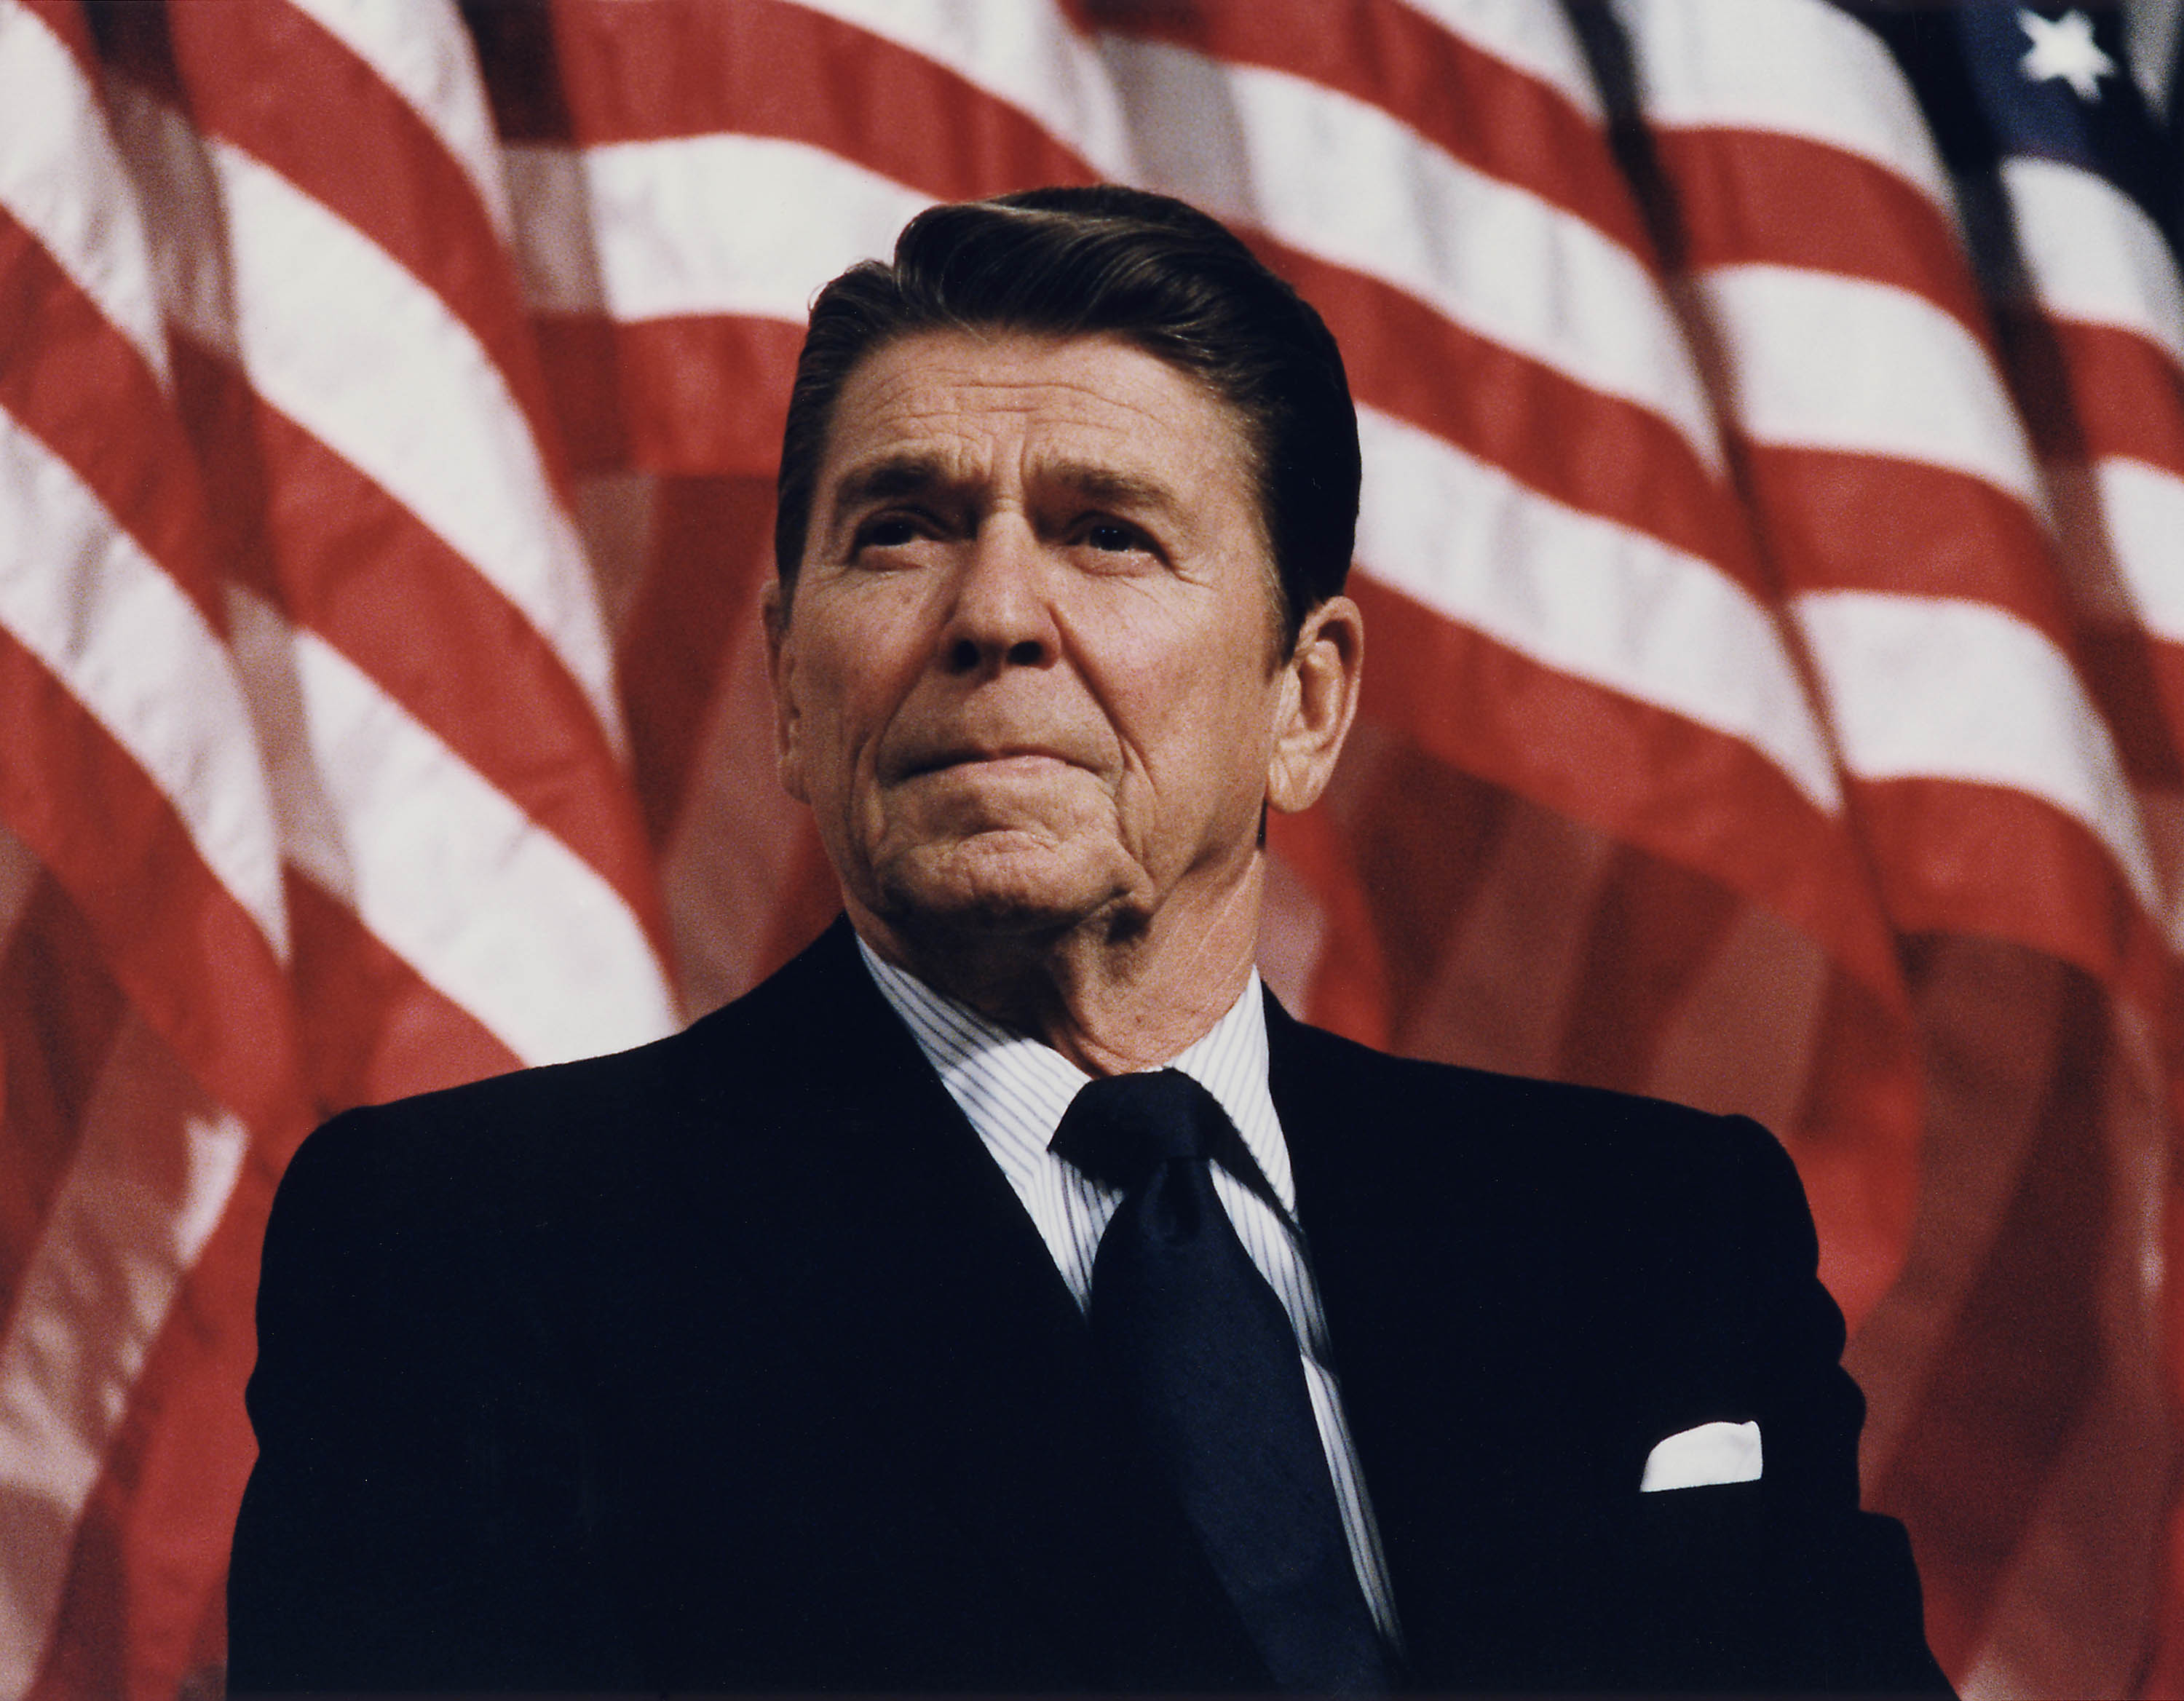 Amazing Ronald Reagan Pictures & Backgrounds